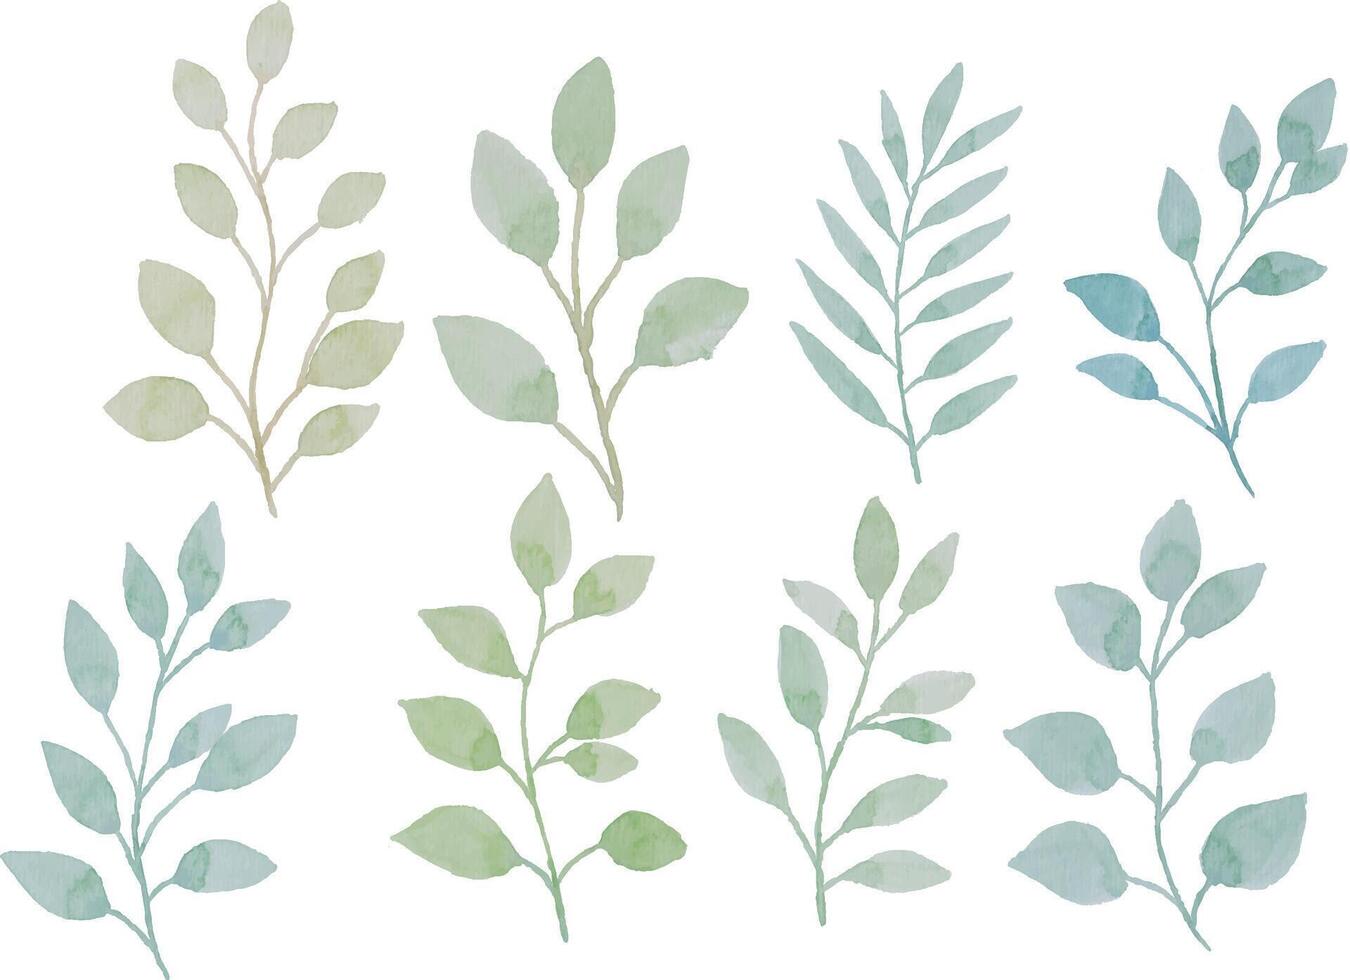 Assortment of watercolor leaves illustration set - green leaf branches collection for wedding, greetings, stationary, wallpapers, fashion, background. olive, green leaves, Eucalyptus etc vector